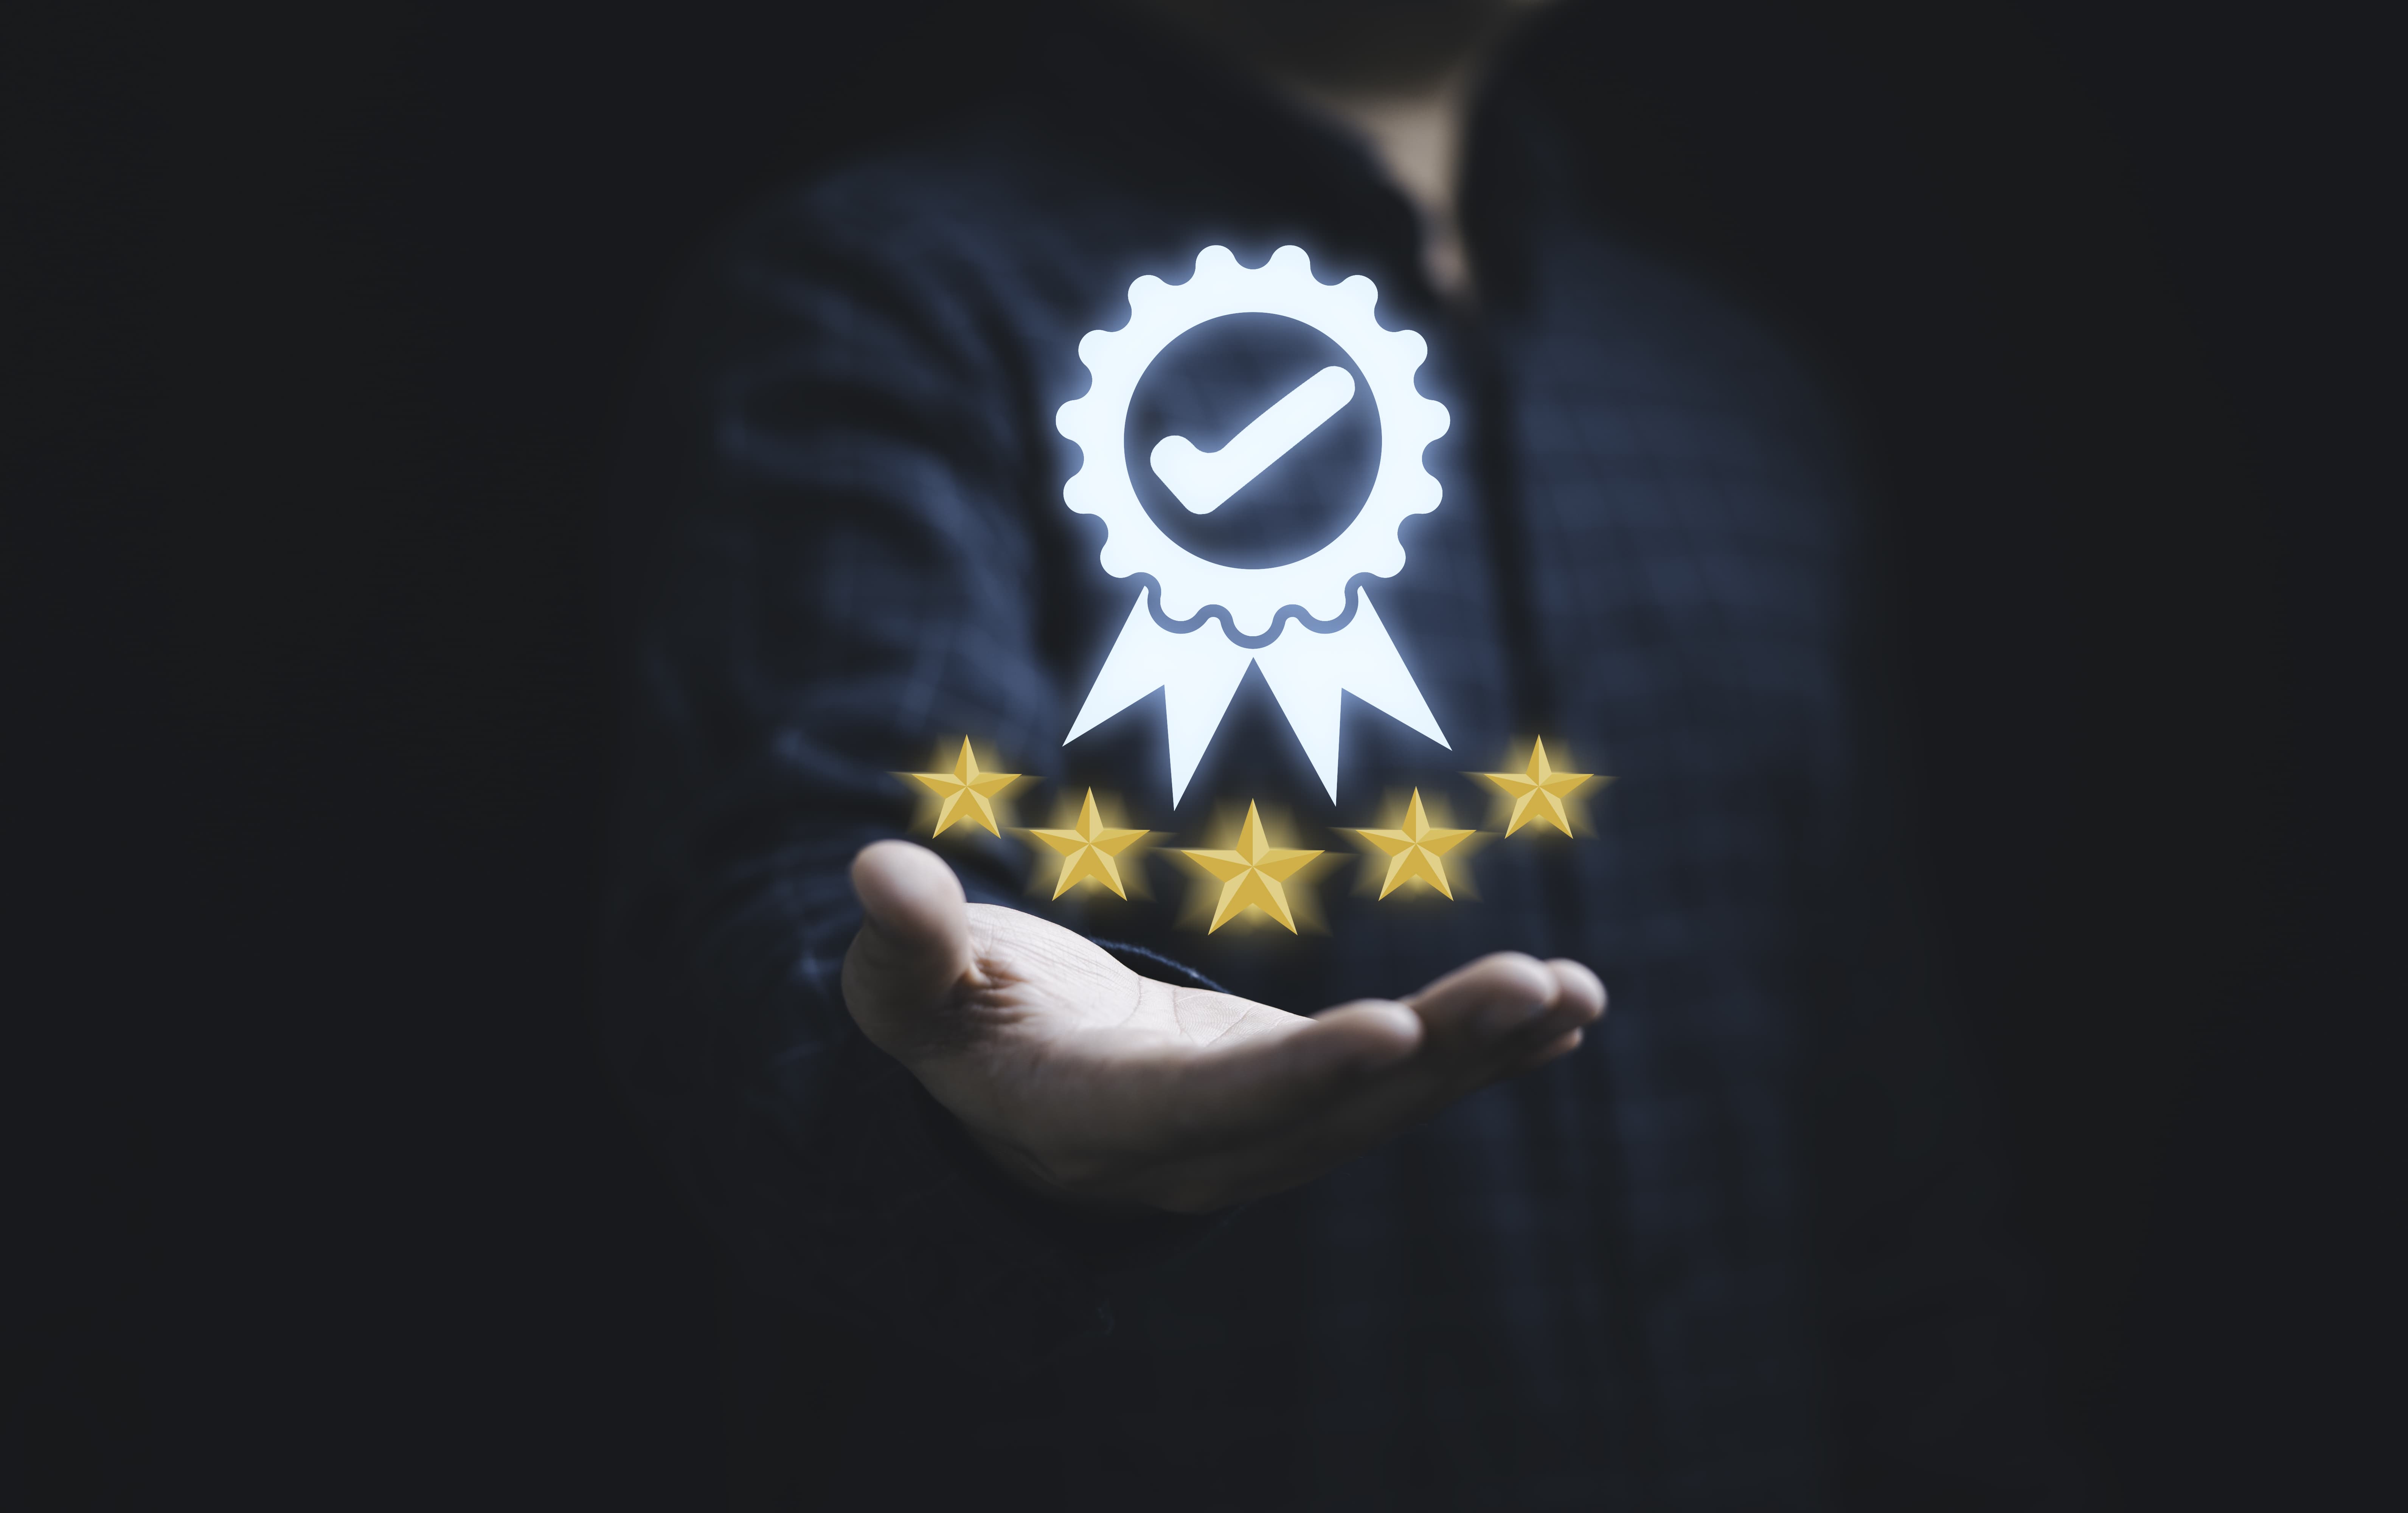 5-stars held by customer - it's important for brands to maintain quality